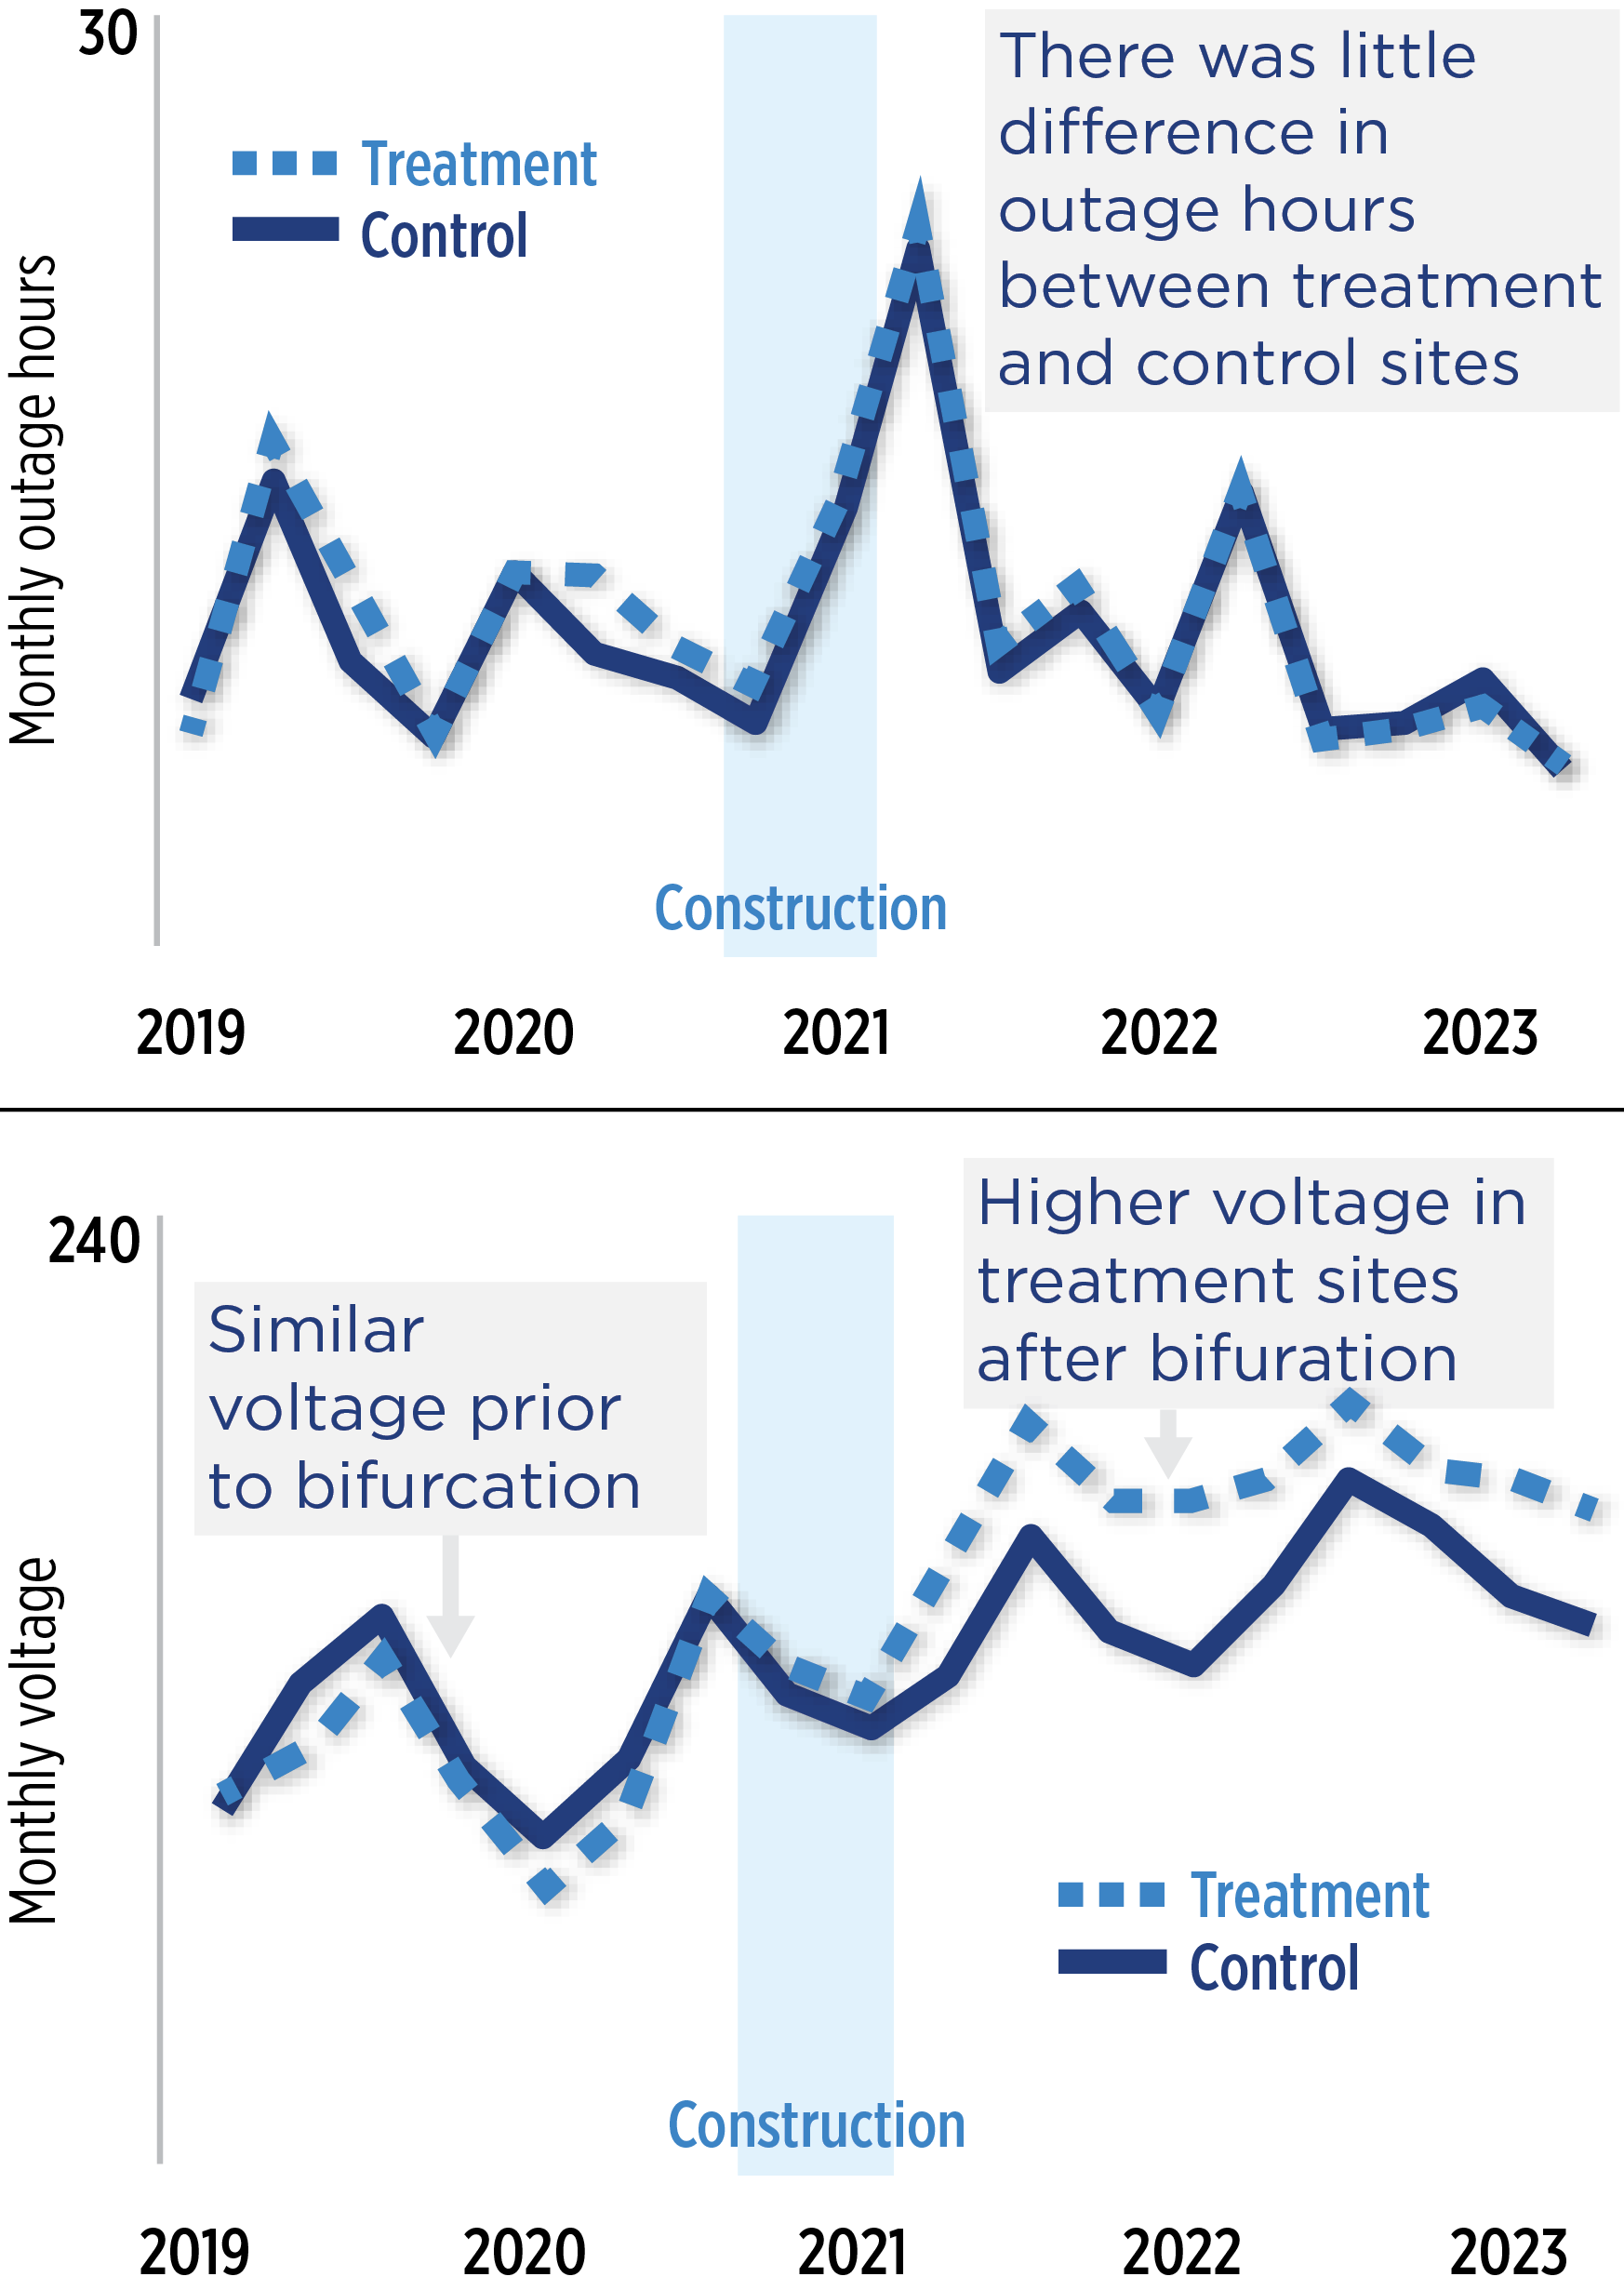 Line graphs from 2019 to 2023 show that there was little difference in outage ours between treatment and control sites. Construction of transformers occured around 2021. Prior to construction, treatment and control sites had similar voltage, and after construction, treatment sites had higher voltage.